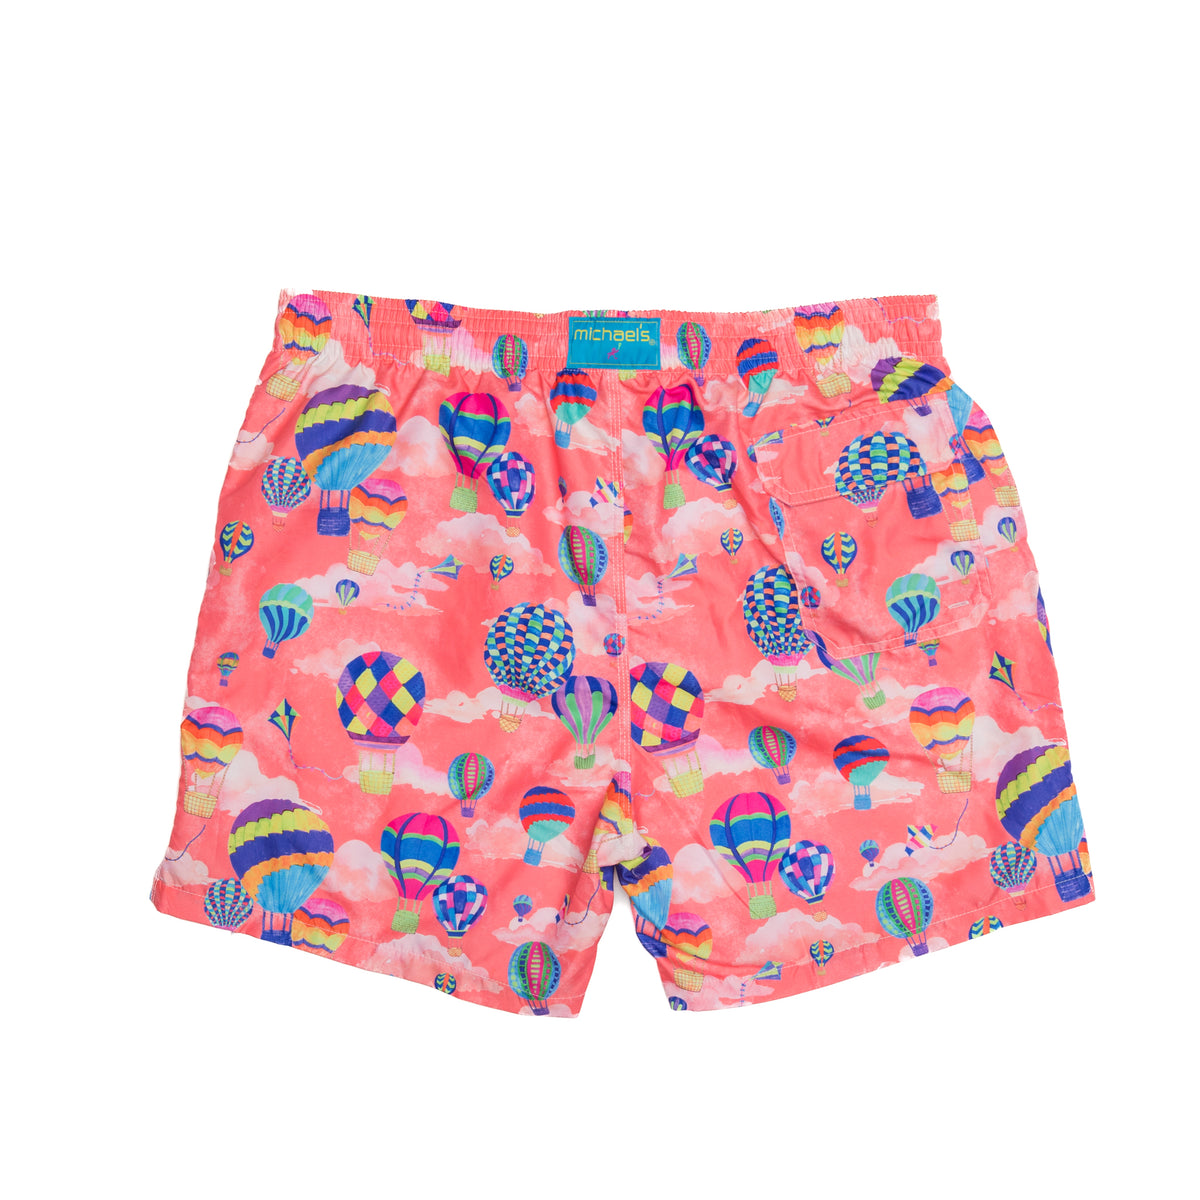 Coral swim trunks with hot air balloons pattern for boys, back view